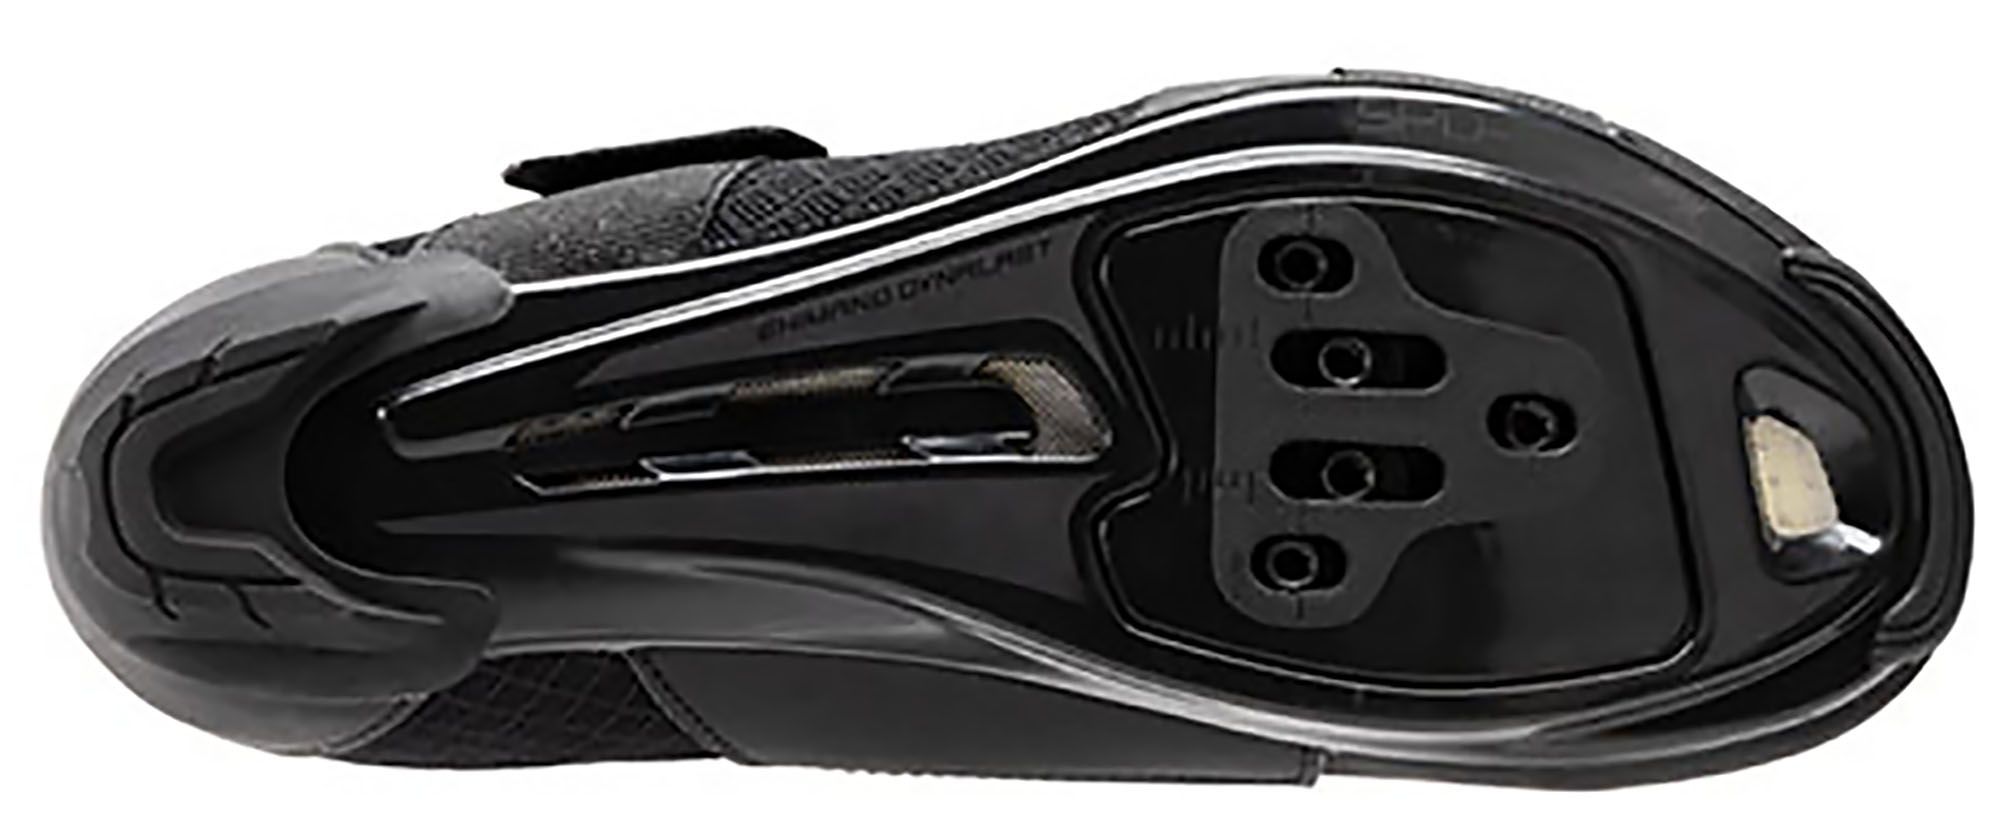 Shimano Adult Indoor Cycling Shoes